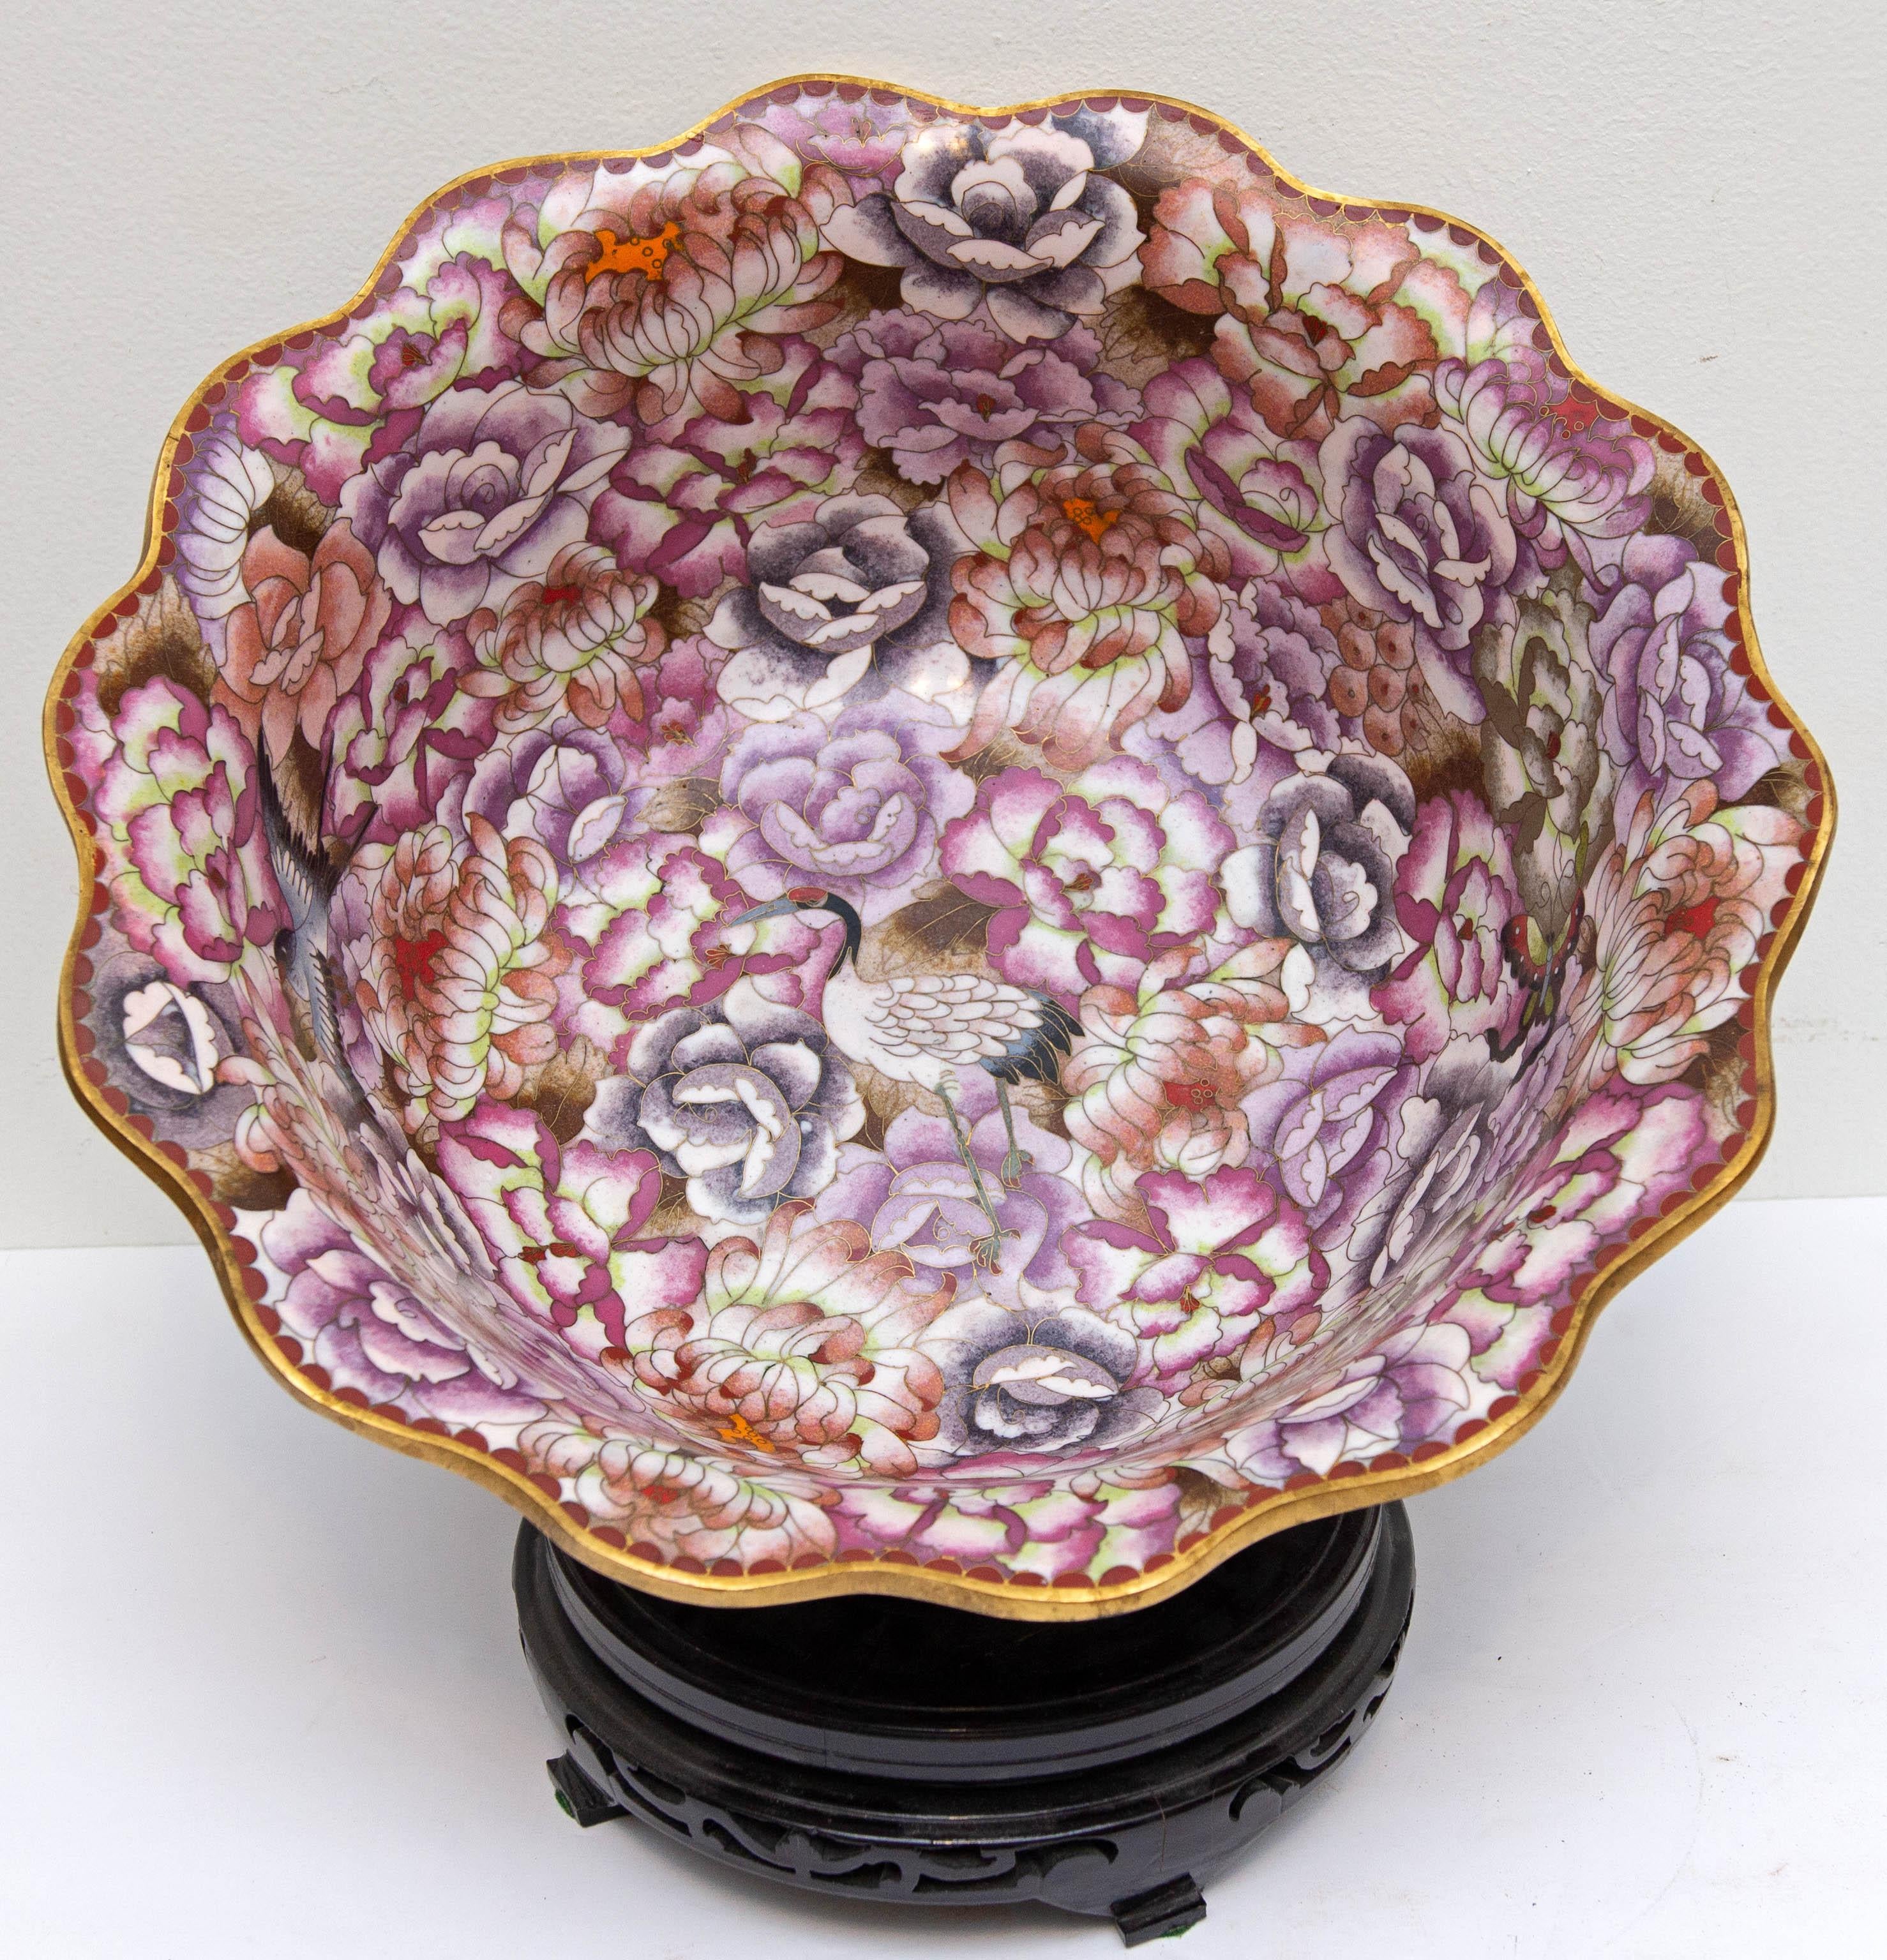 Large floral cloisonné gilt metal center bowl. Decorated interior and exterior. Pinks, marron, and blue flowers. With stand, circa mid-20th century. Measures: 15 1/4